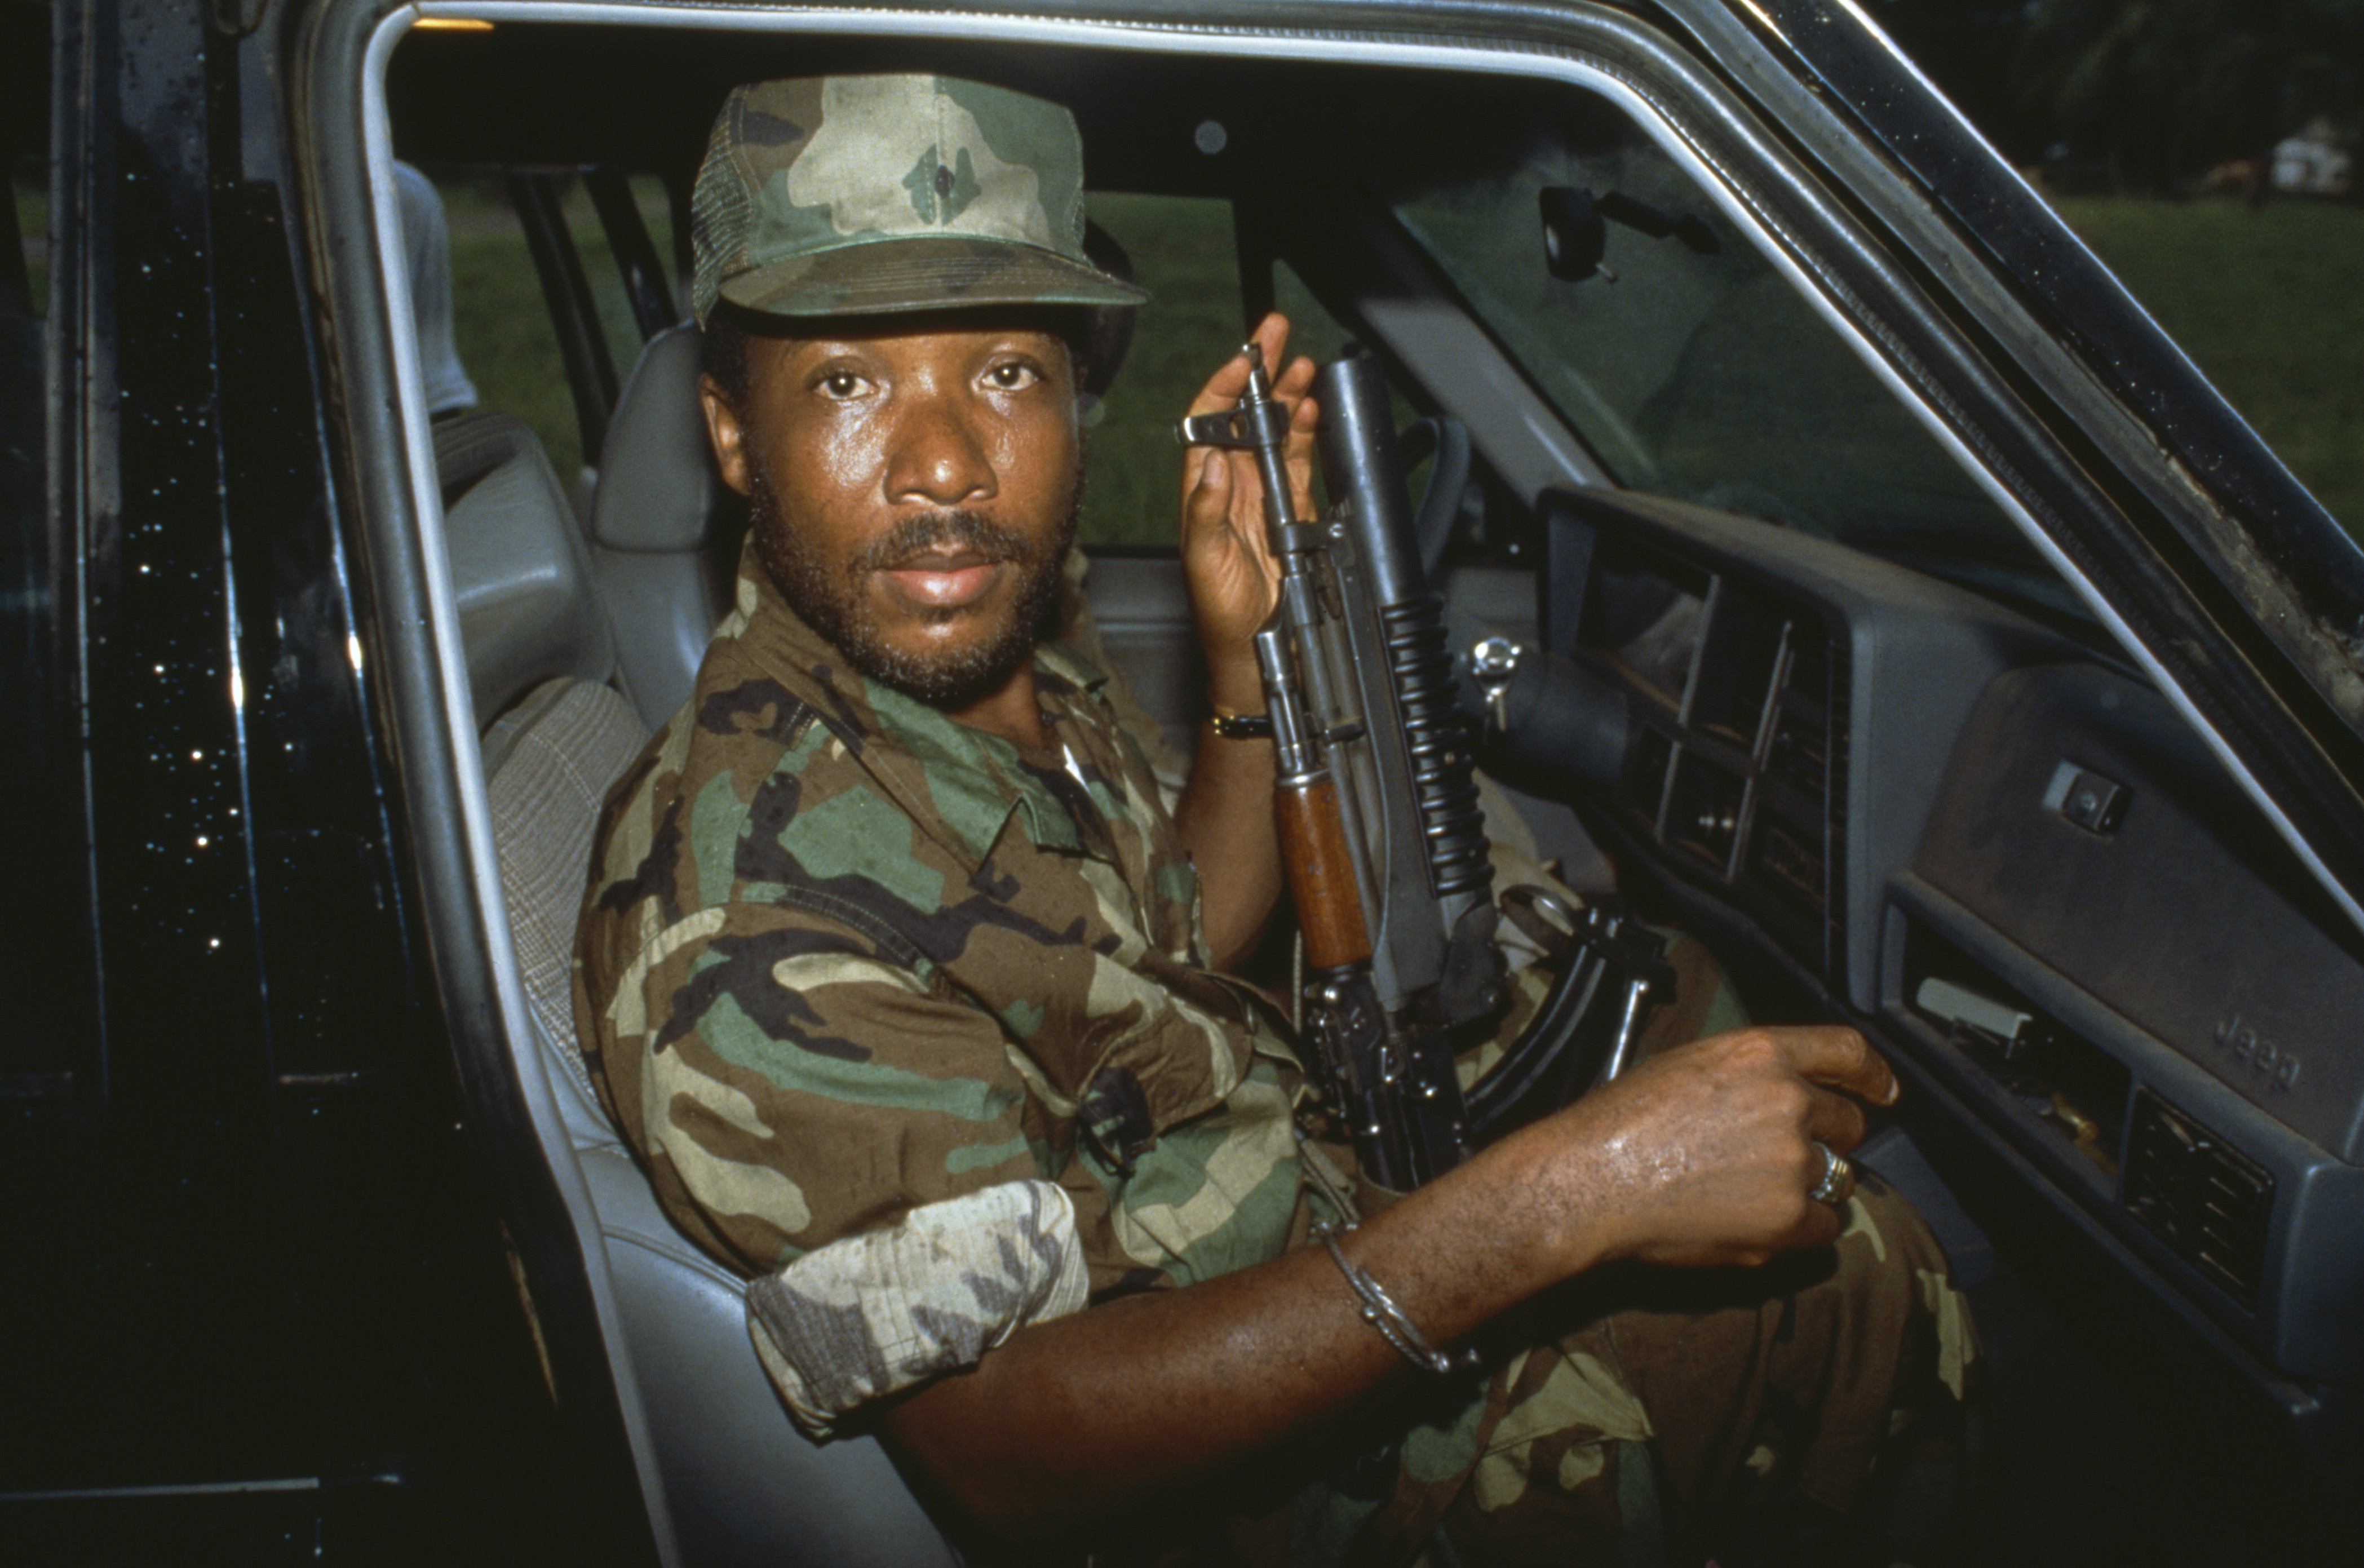 Frontline and Pro Publica's "Firestone and the Warlord" investigates the secret relationship between the American tire company and the infamous Liberian warlord/president/war criminal Charles Taylor (pictured). [Photo Credit: © Patrick Robert/Sygma/Corbis]